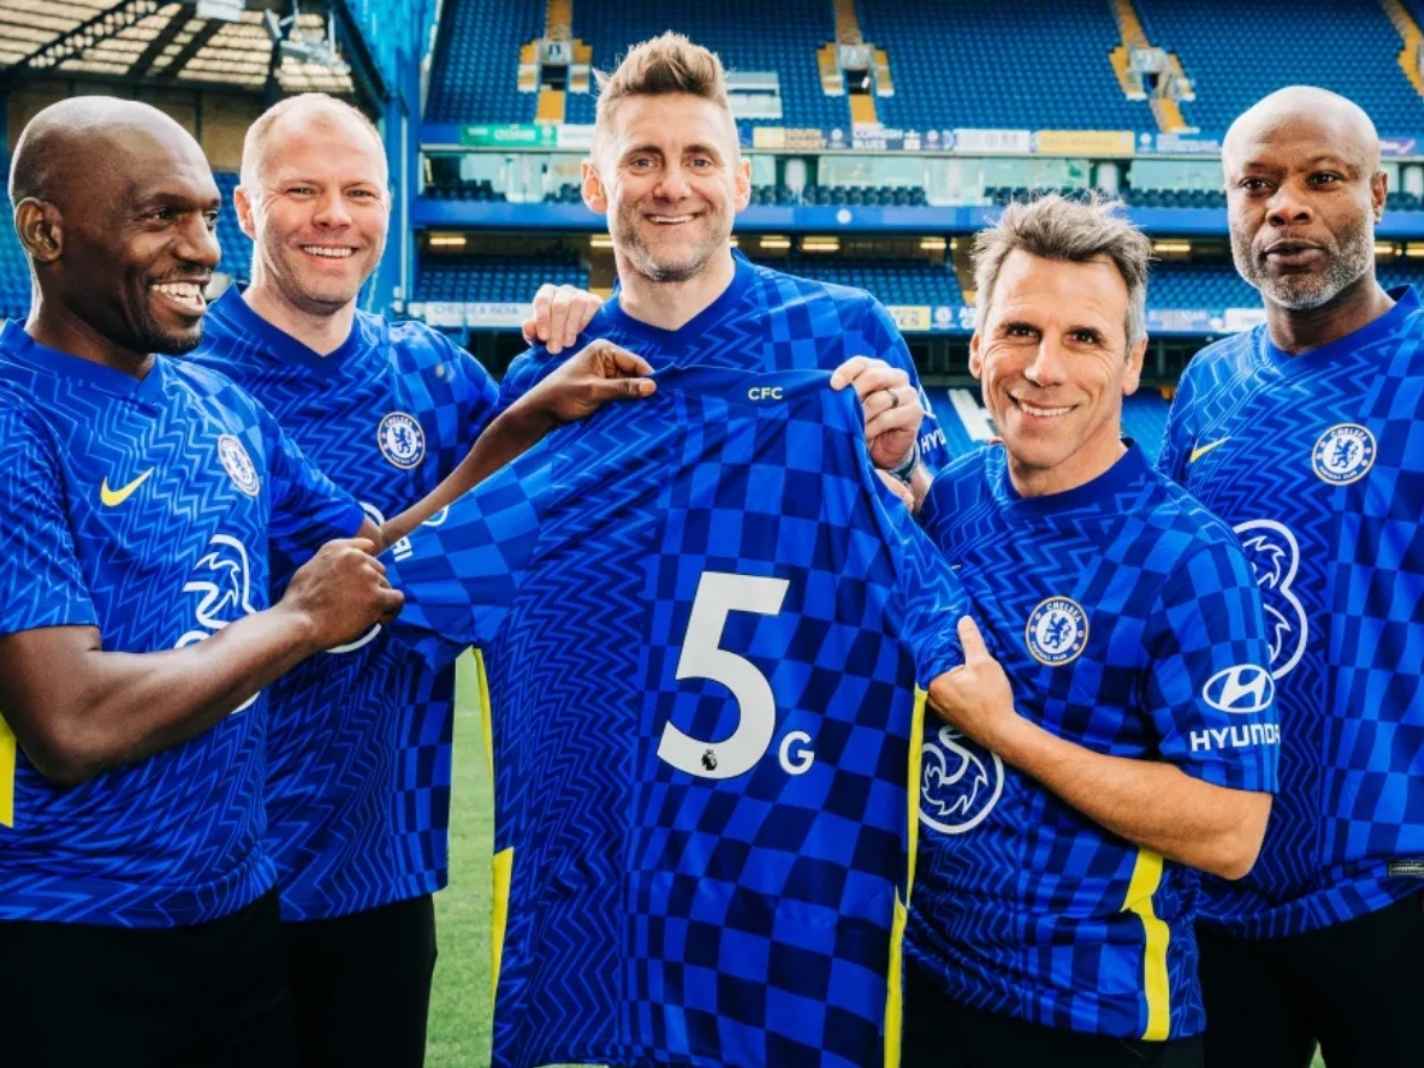 5G launch gimmick brings former Chelsea players to Stamford Bridge